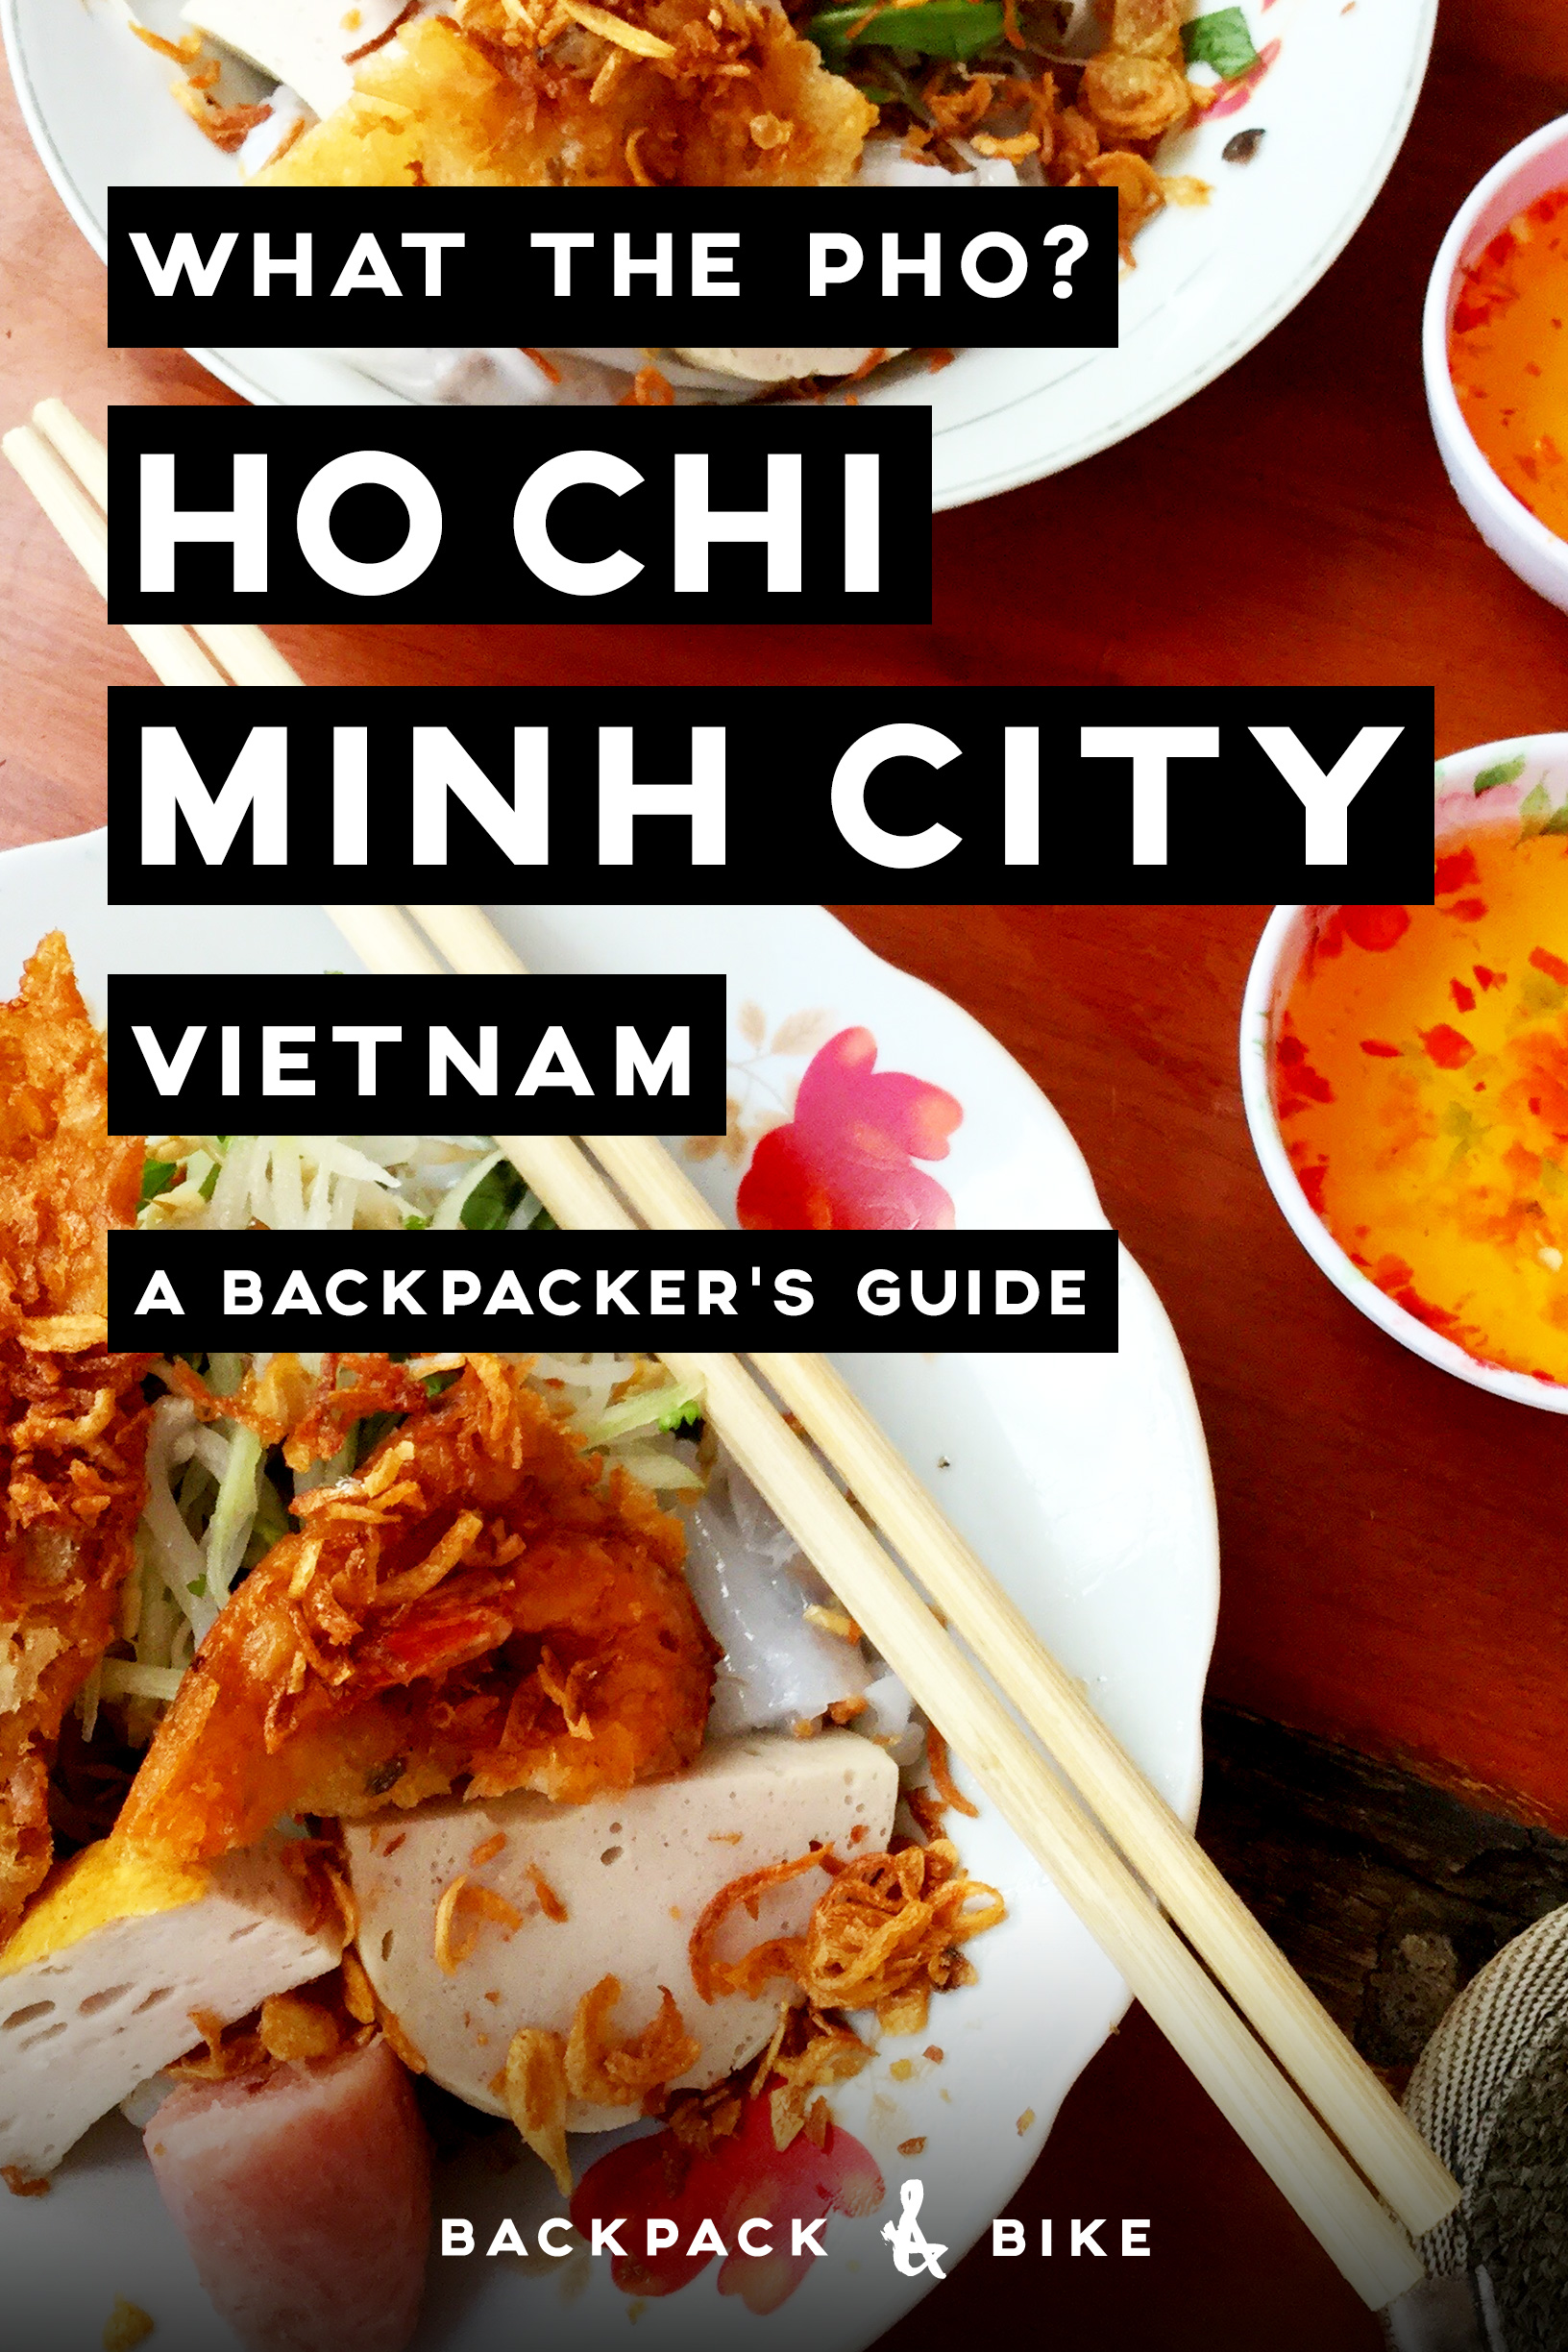 Ho Chi Minh City | What the pho? | A backpacker's guide | What are the must sees, dos, and eats in this busy city? Pin to read later!